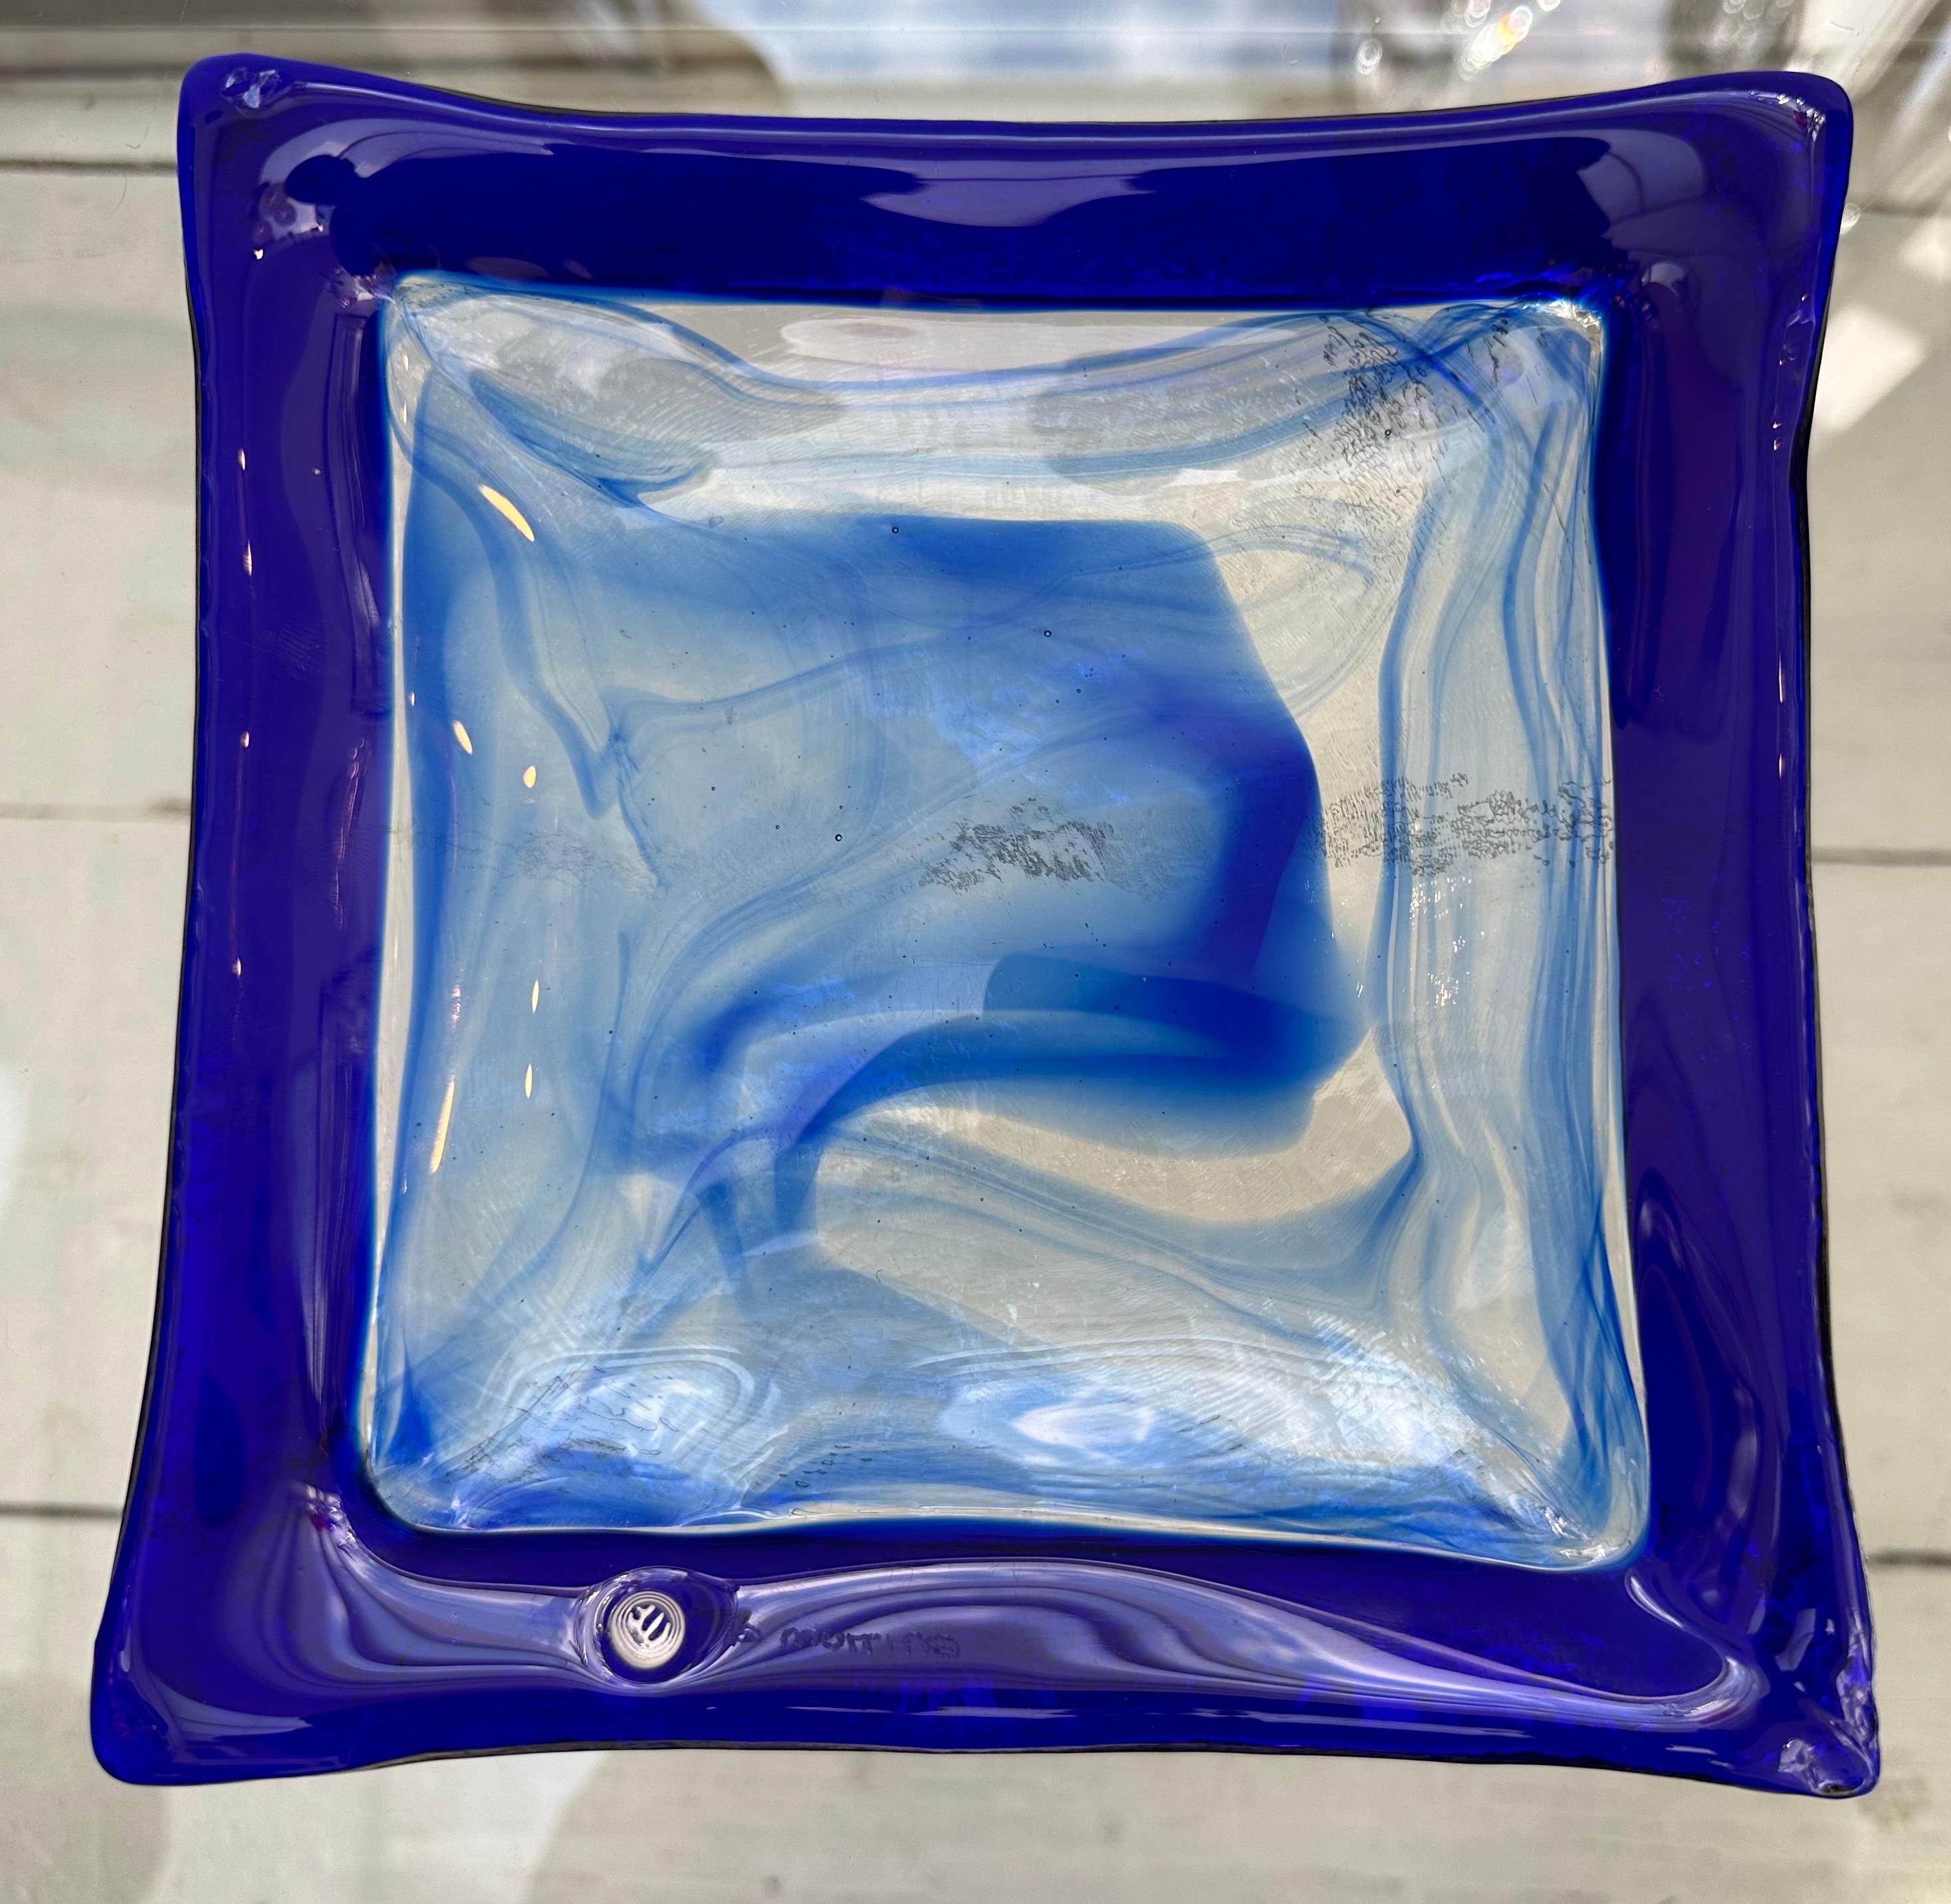 Circa 1990s Italian Murano cobalt blue and clear grass square dish manufactured by La Murrina. Signed La Murrina and stamped with their round 